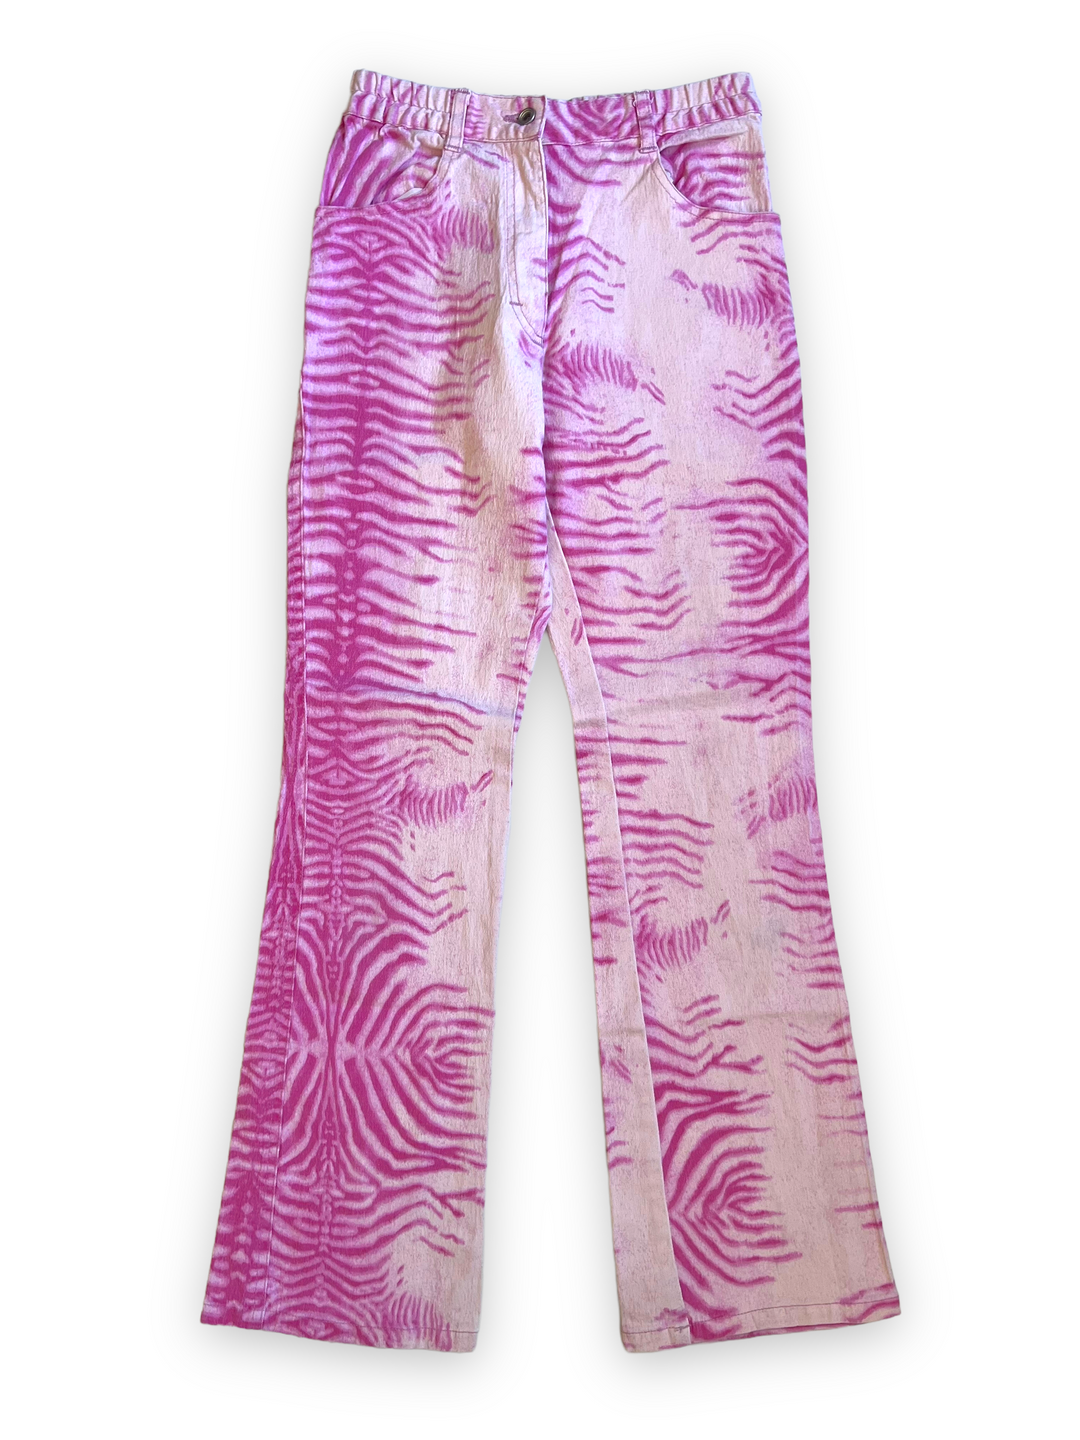 Vintage Mid Waisted Pink Zebra Jeans Women's Extra Small(32)